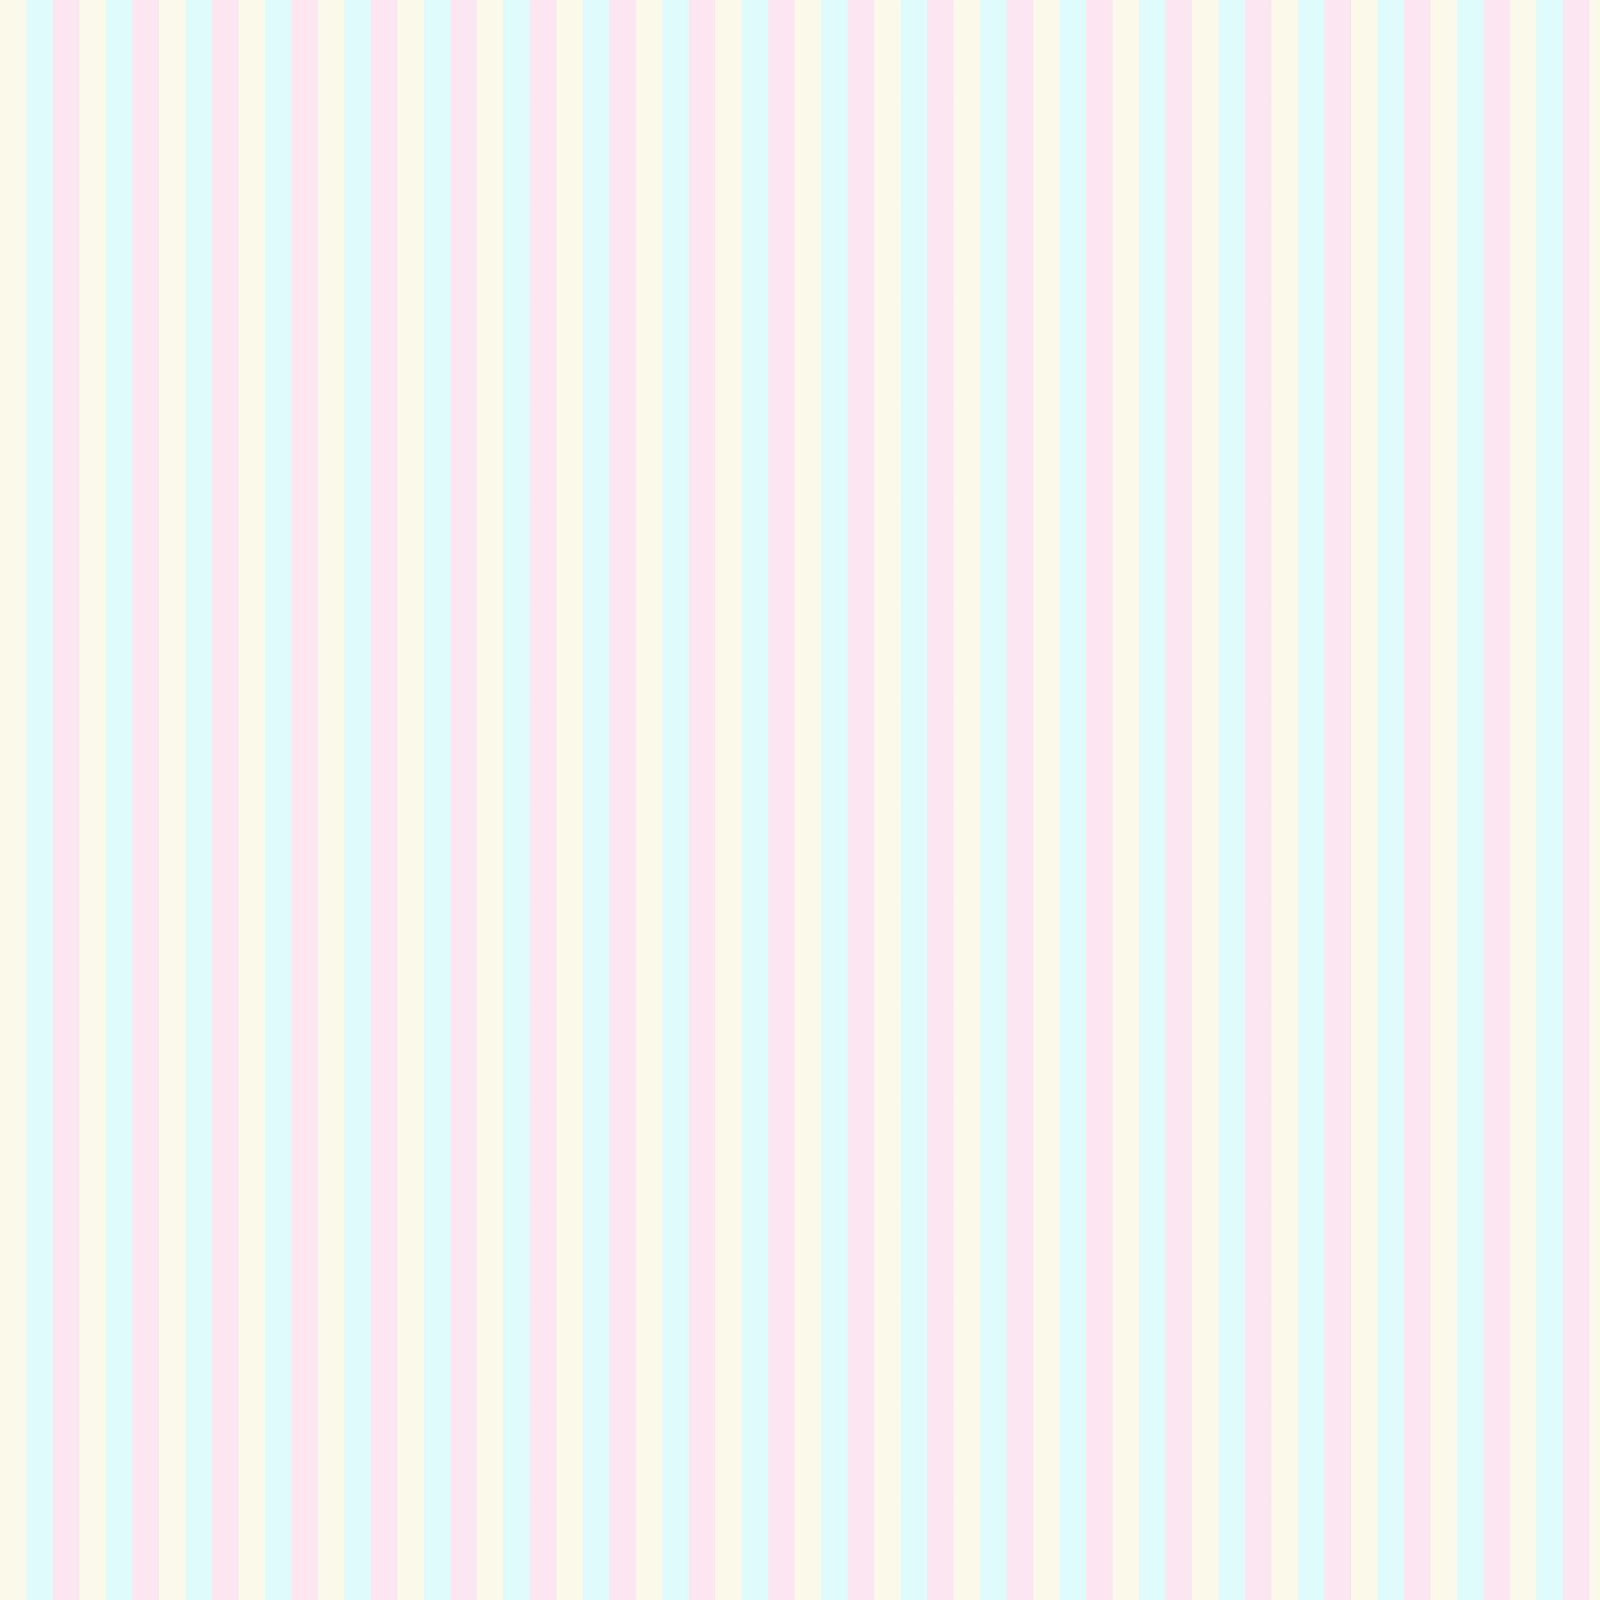 Stampin D'Amour: Free Digital Scrapbook Paper - Pink, Blue, and Cream  Stripes